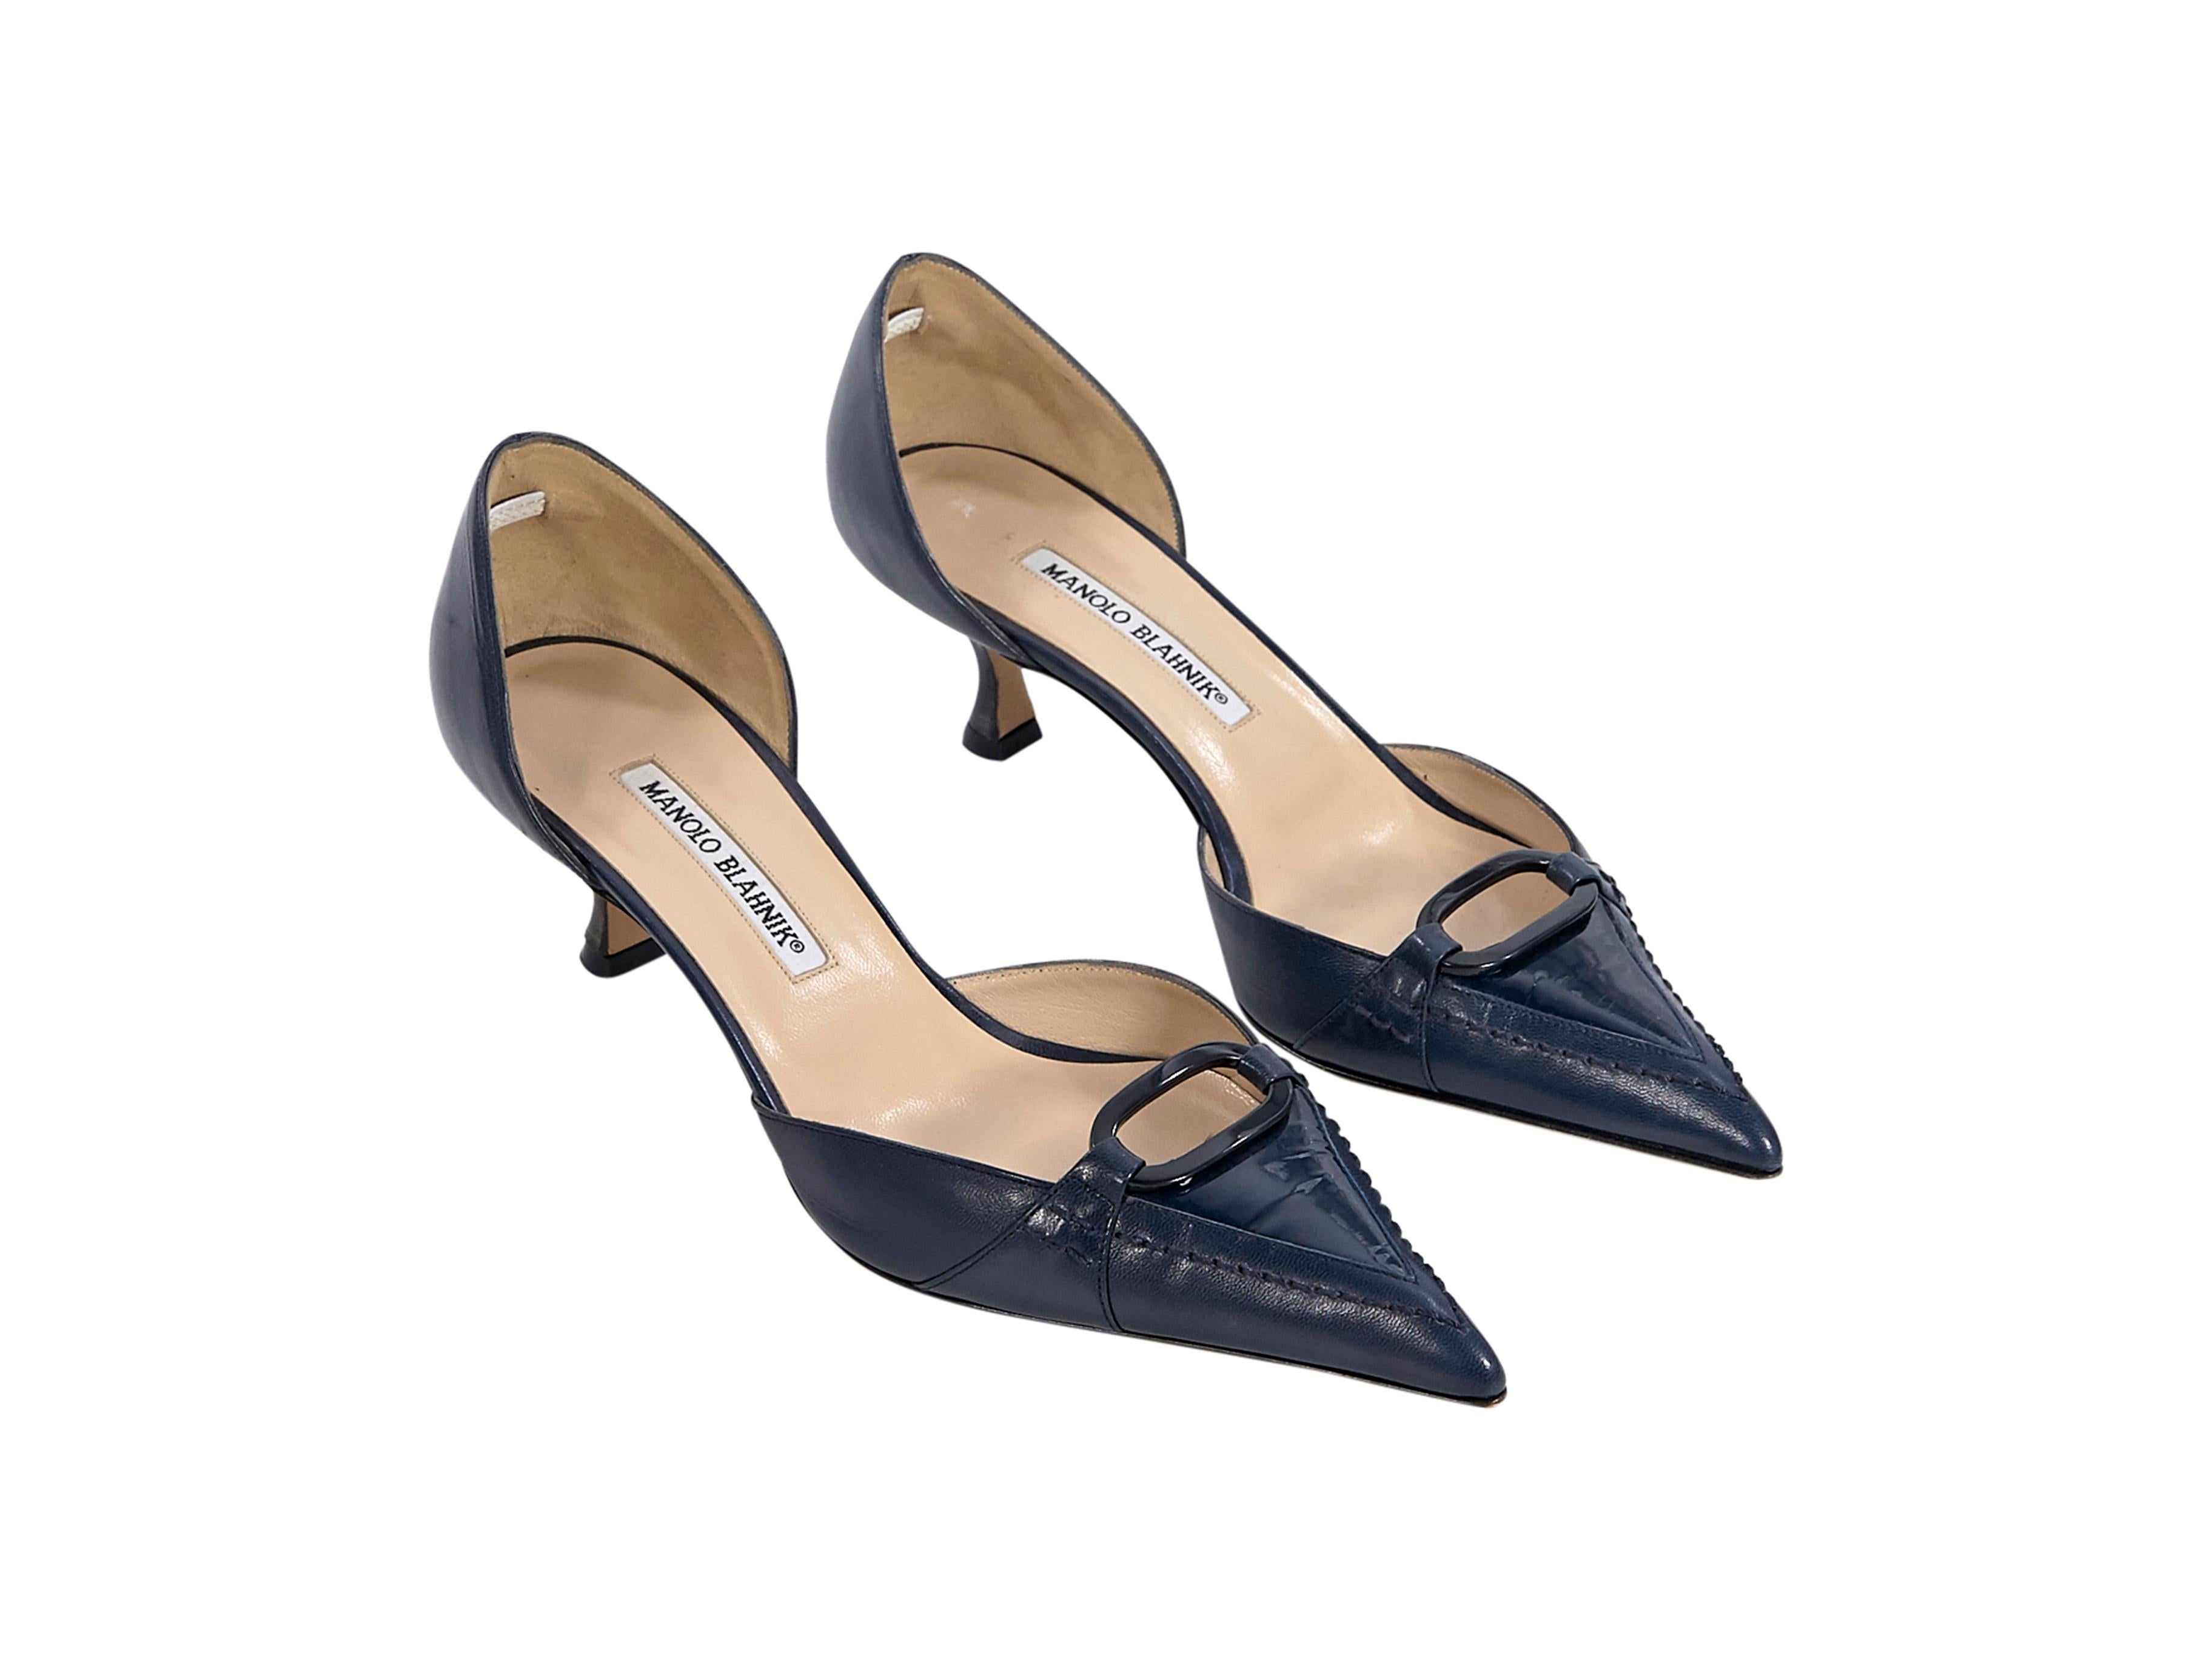 Product details:  Navy blue leather d'Orsay kitten heels by Manolo Blahnik.  Trimmed with patent leather.  Point toe.  Slip-on style.  2.25